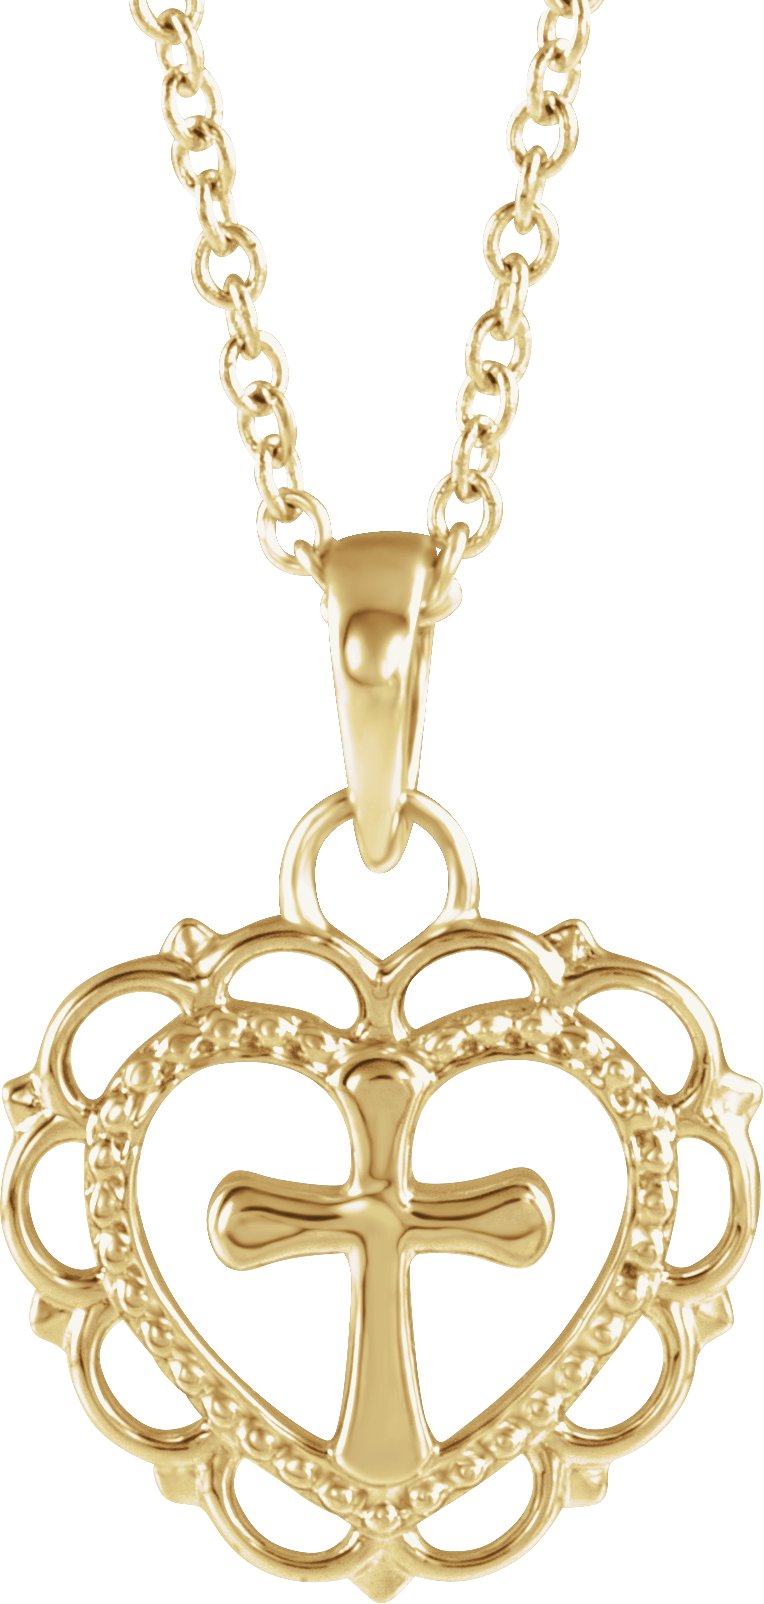 14K Yellow Youth Heart with Cross 16 18 inch Necklace Ref. 13536884